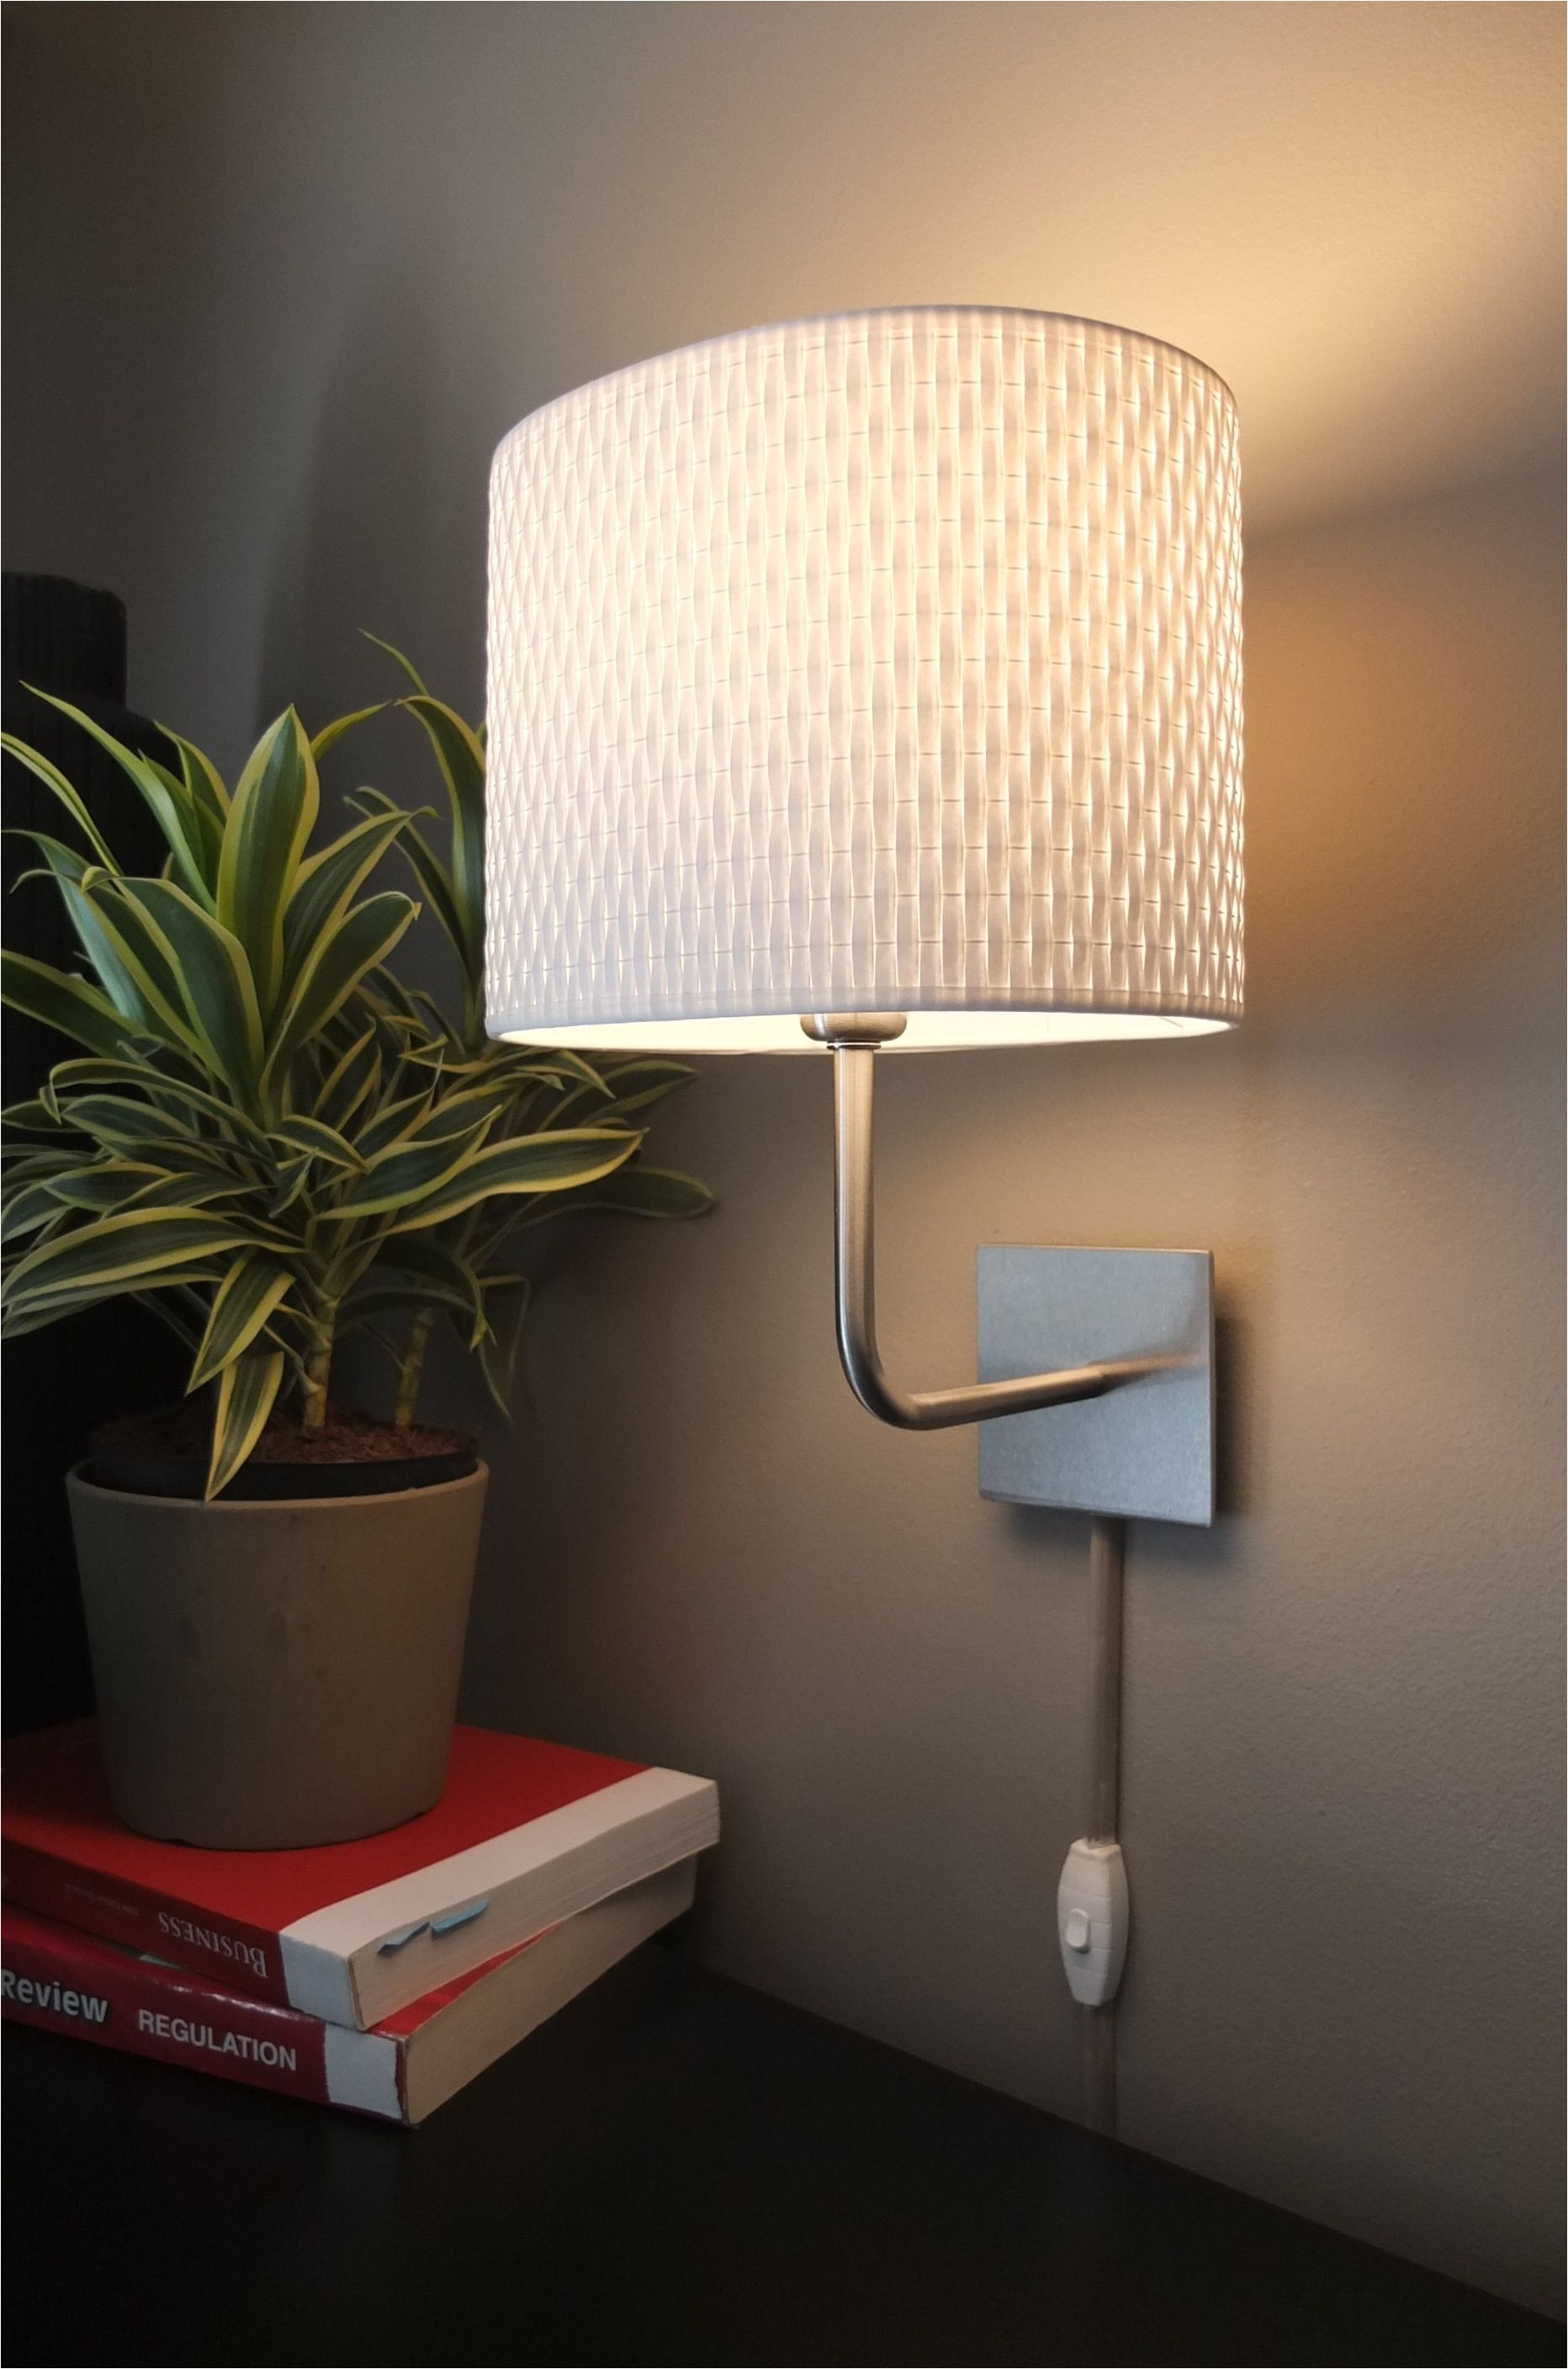 wall mounted ikea lamps are an easy way to add light in a room without a